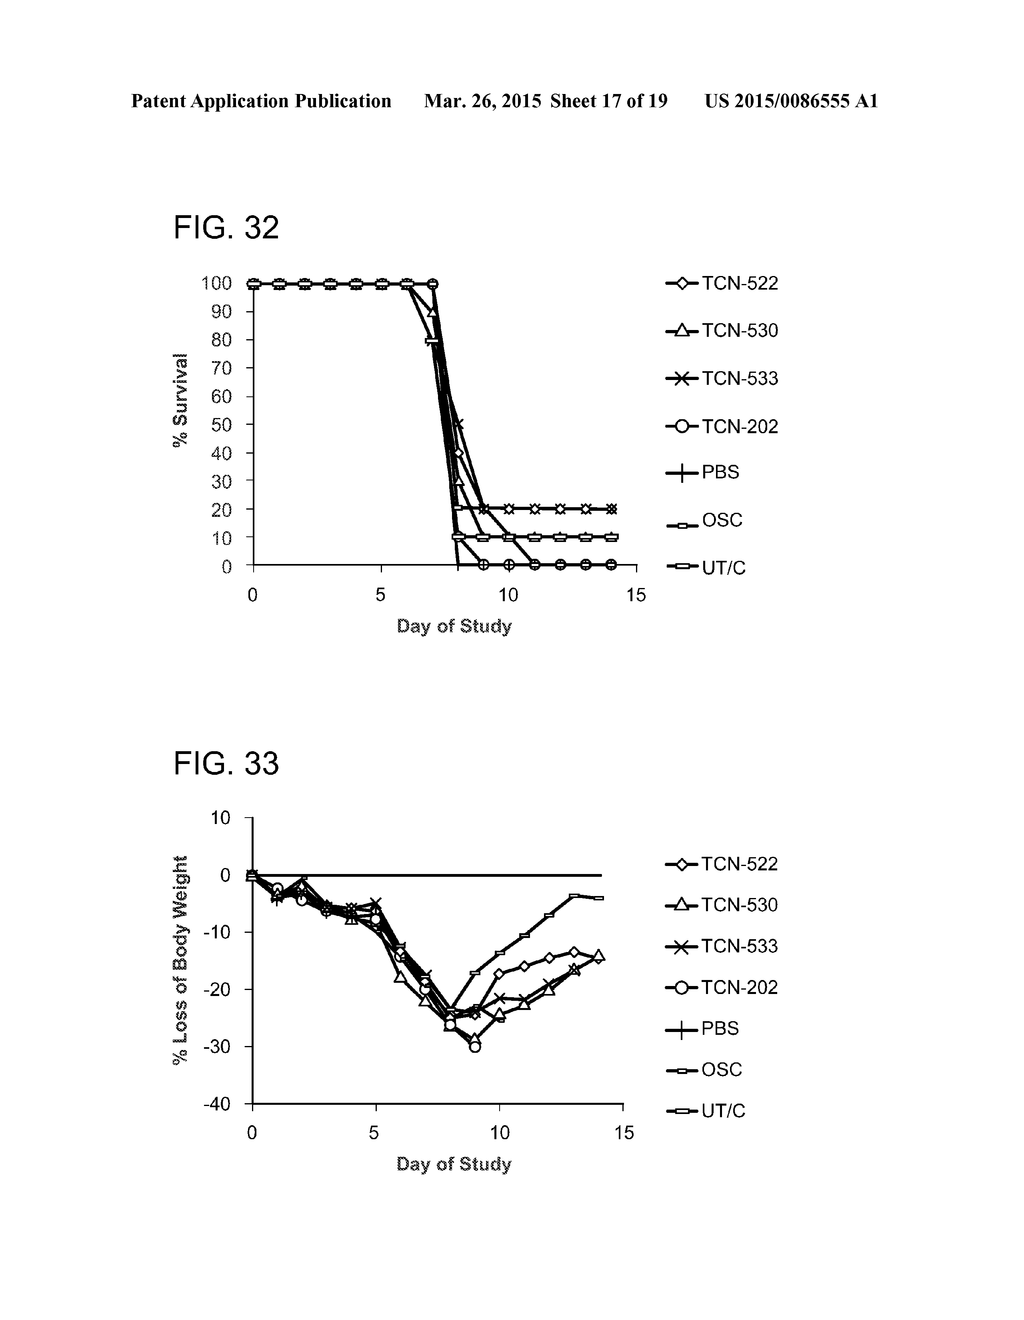 Anti-Hemagglutinin Antibody Compositions and Methods of Use Thereof - diagram, schematic, and image 18